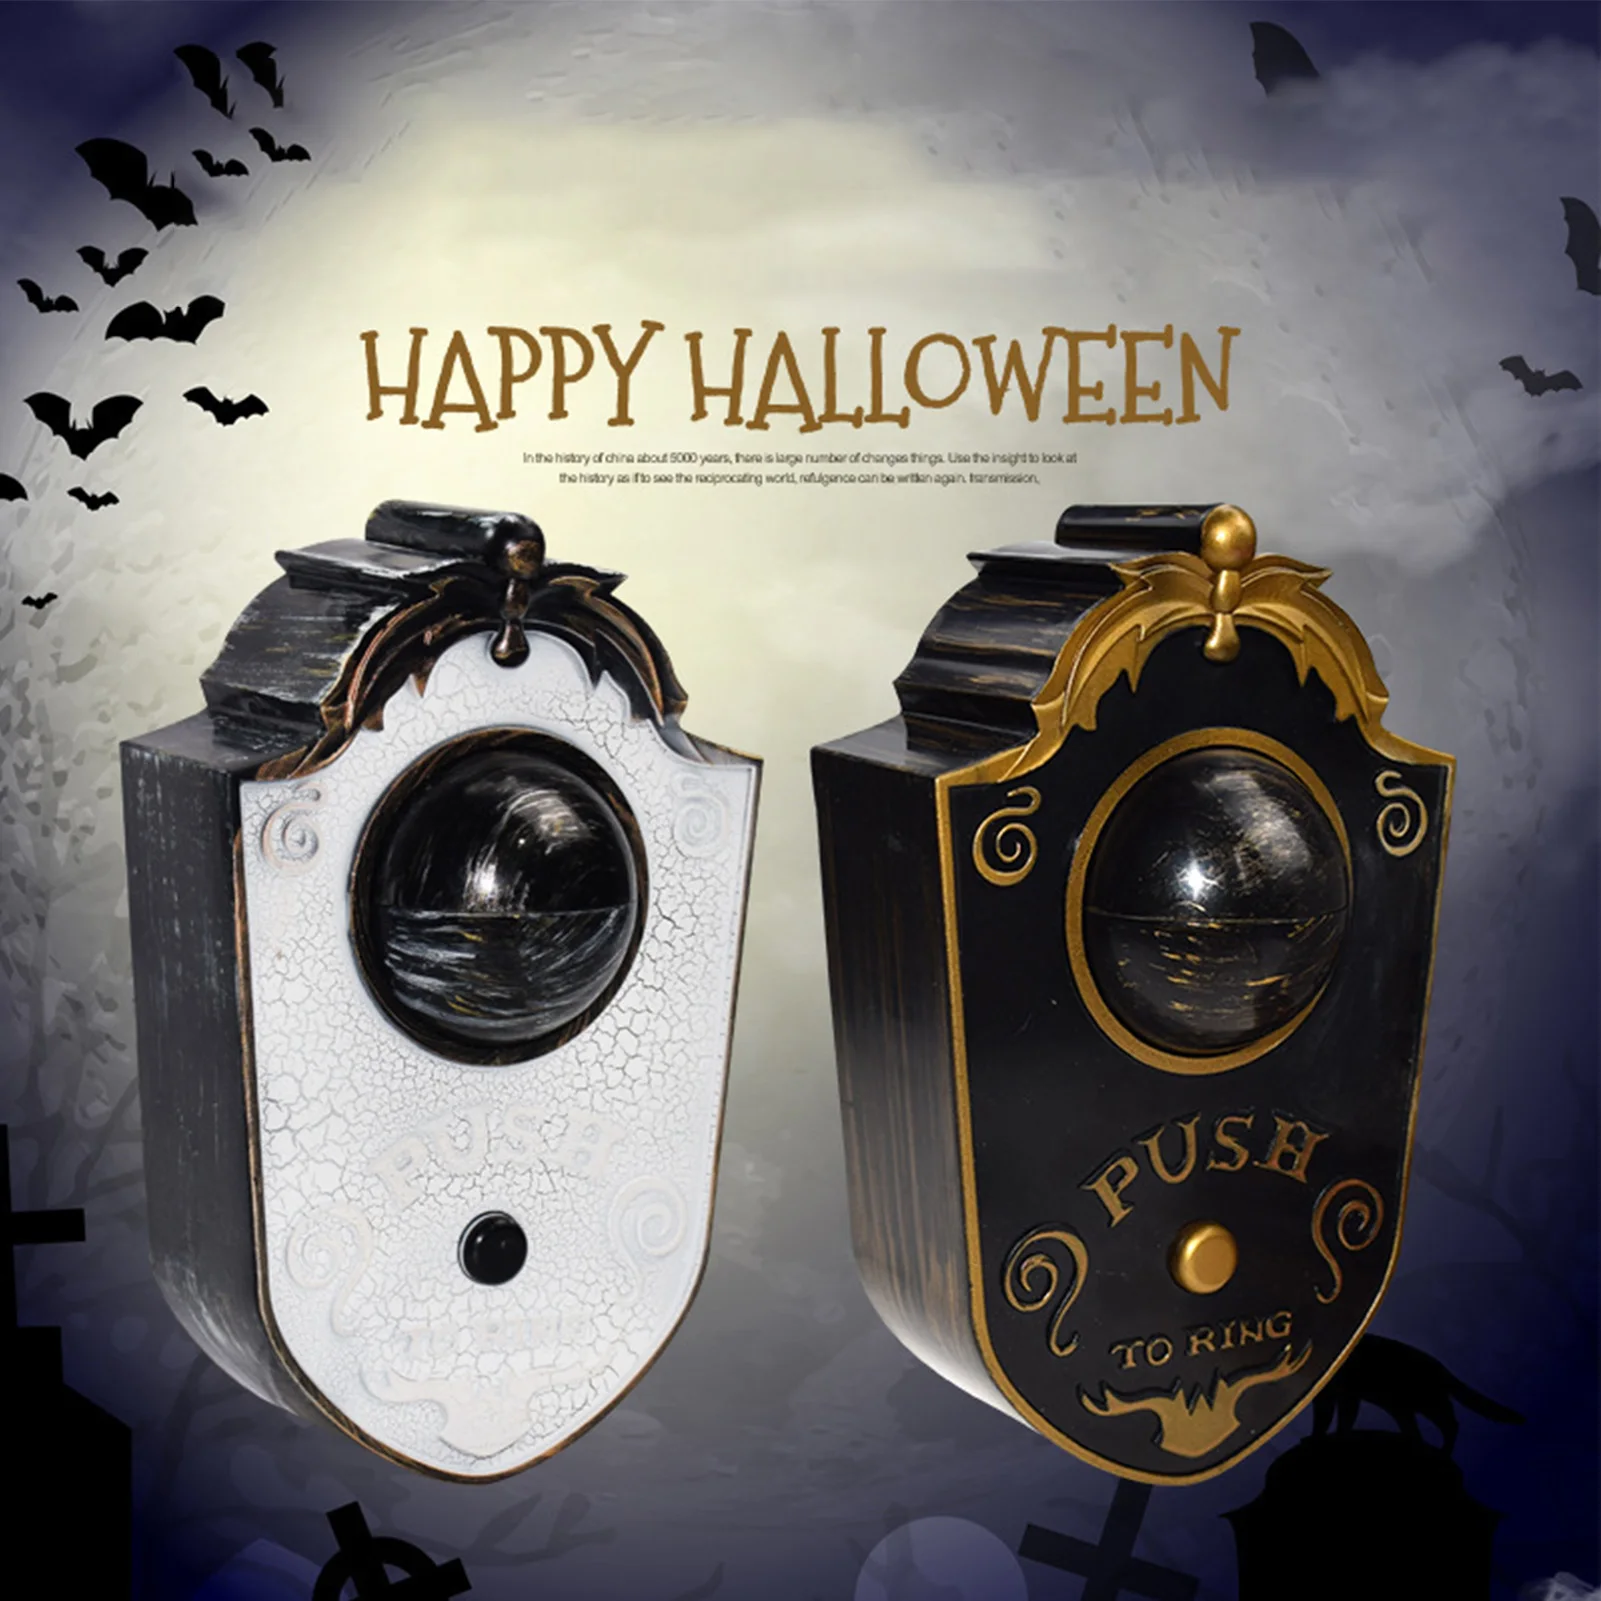 

Realistic Halloween Doorbell with Spooky Sounds Glow in the Dark Animated One-Eyed Doorbell Haunted House Scary Prop Decoration